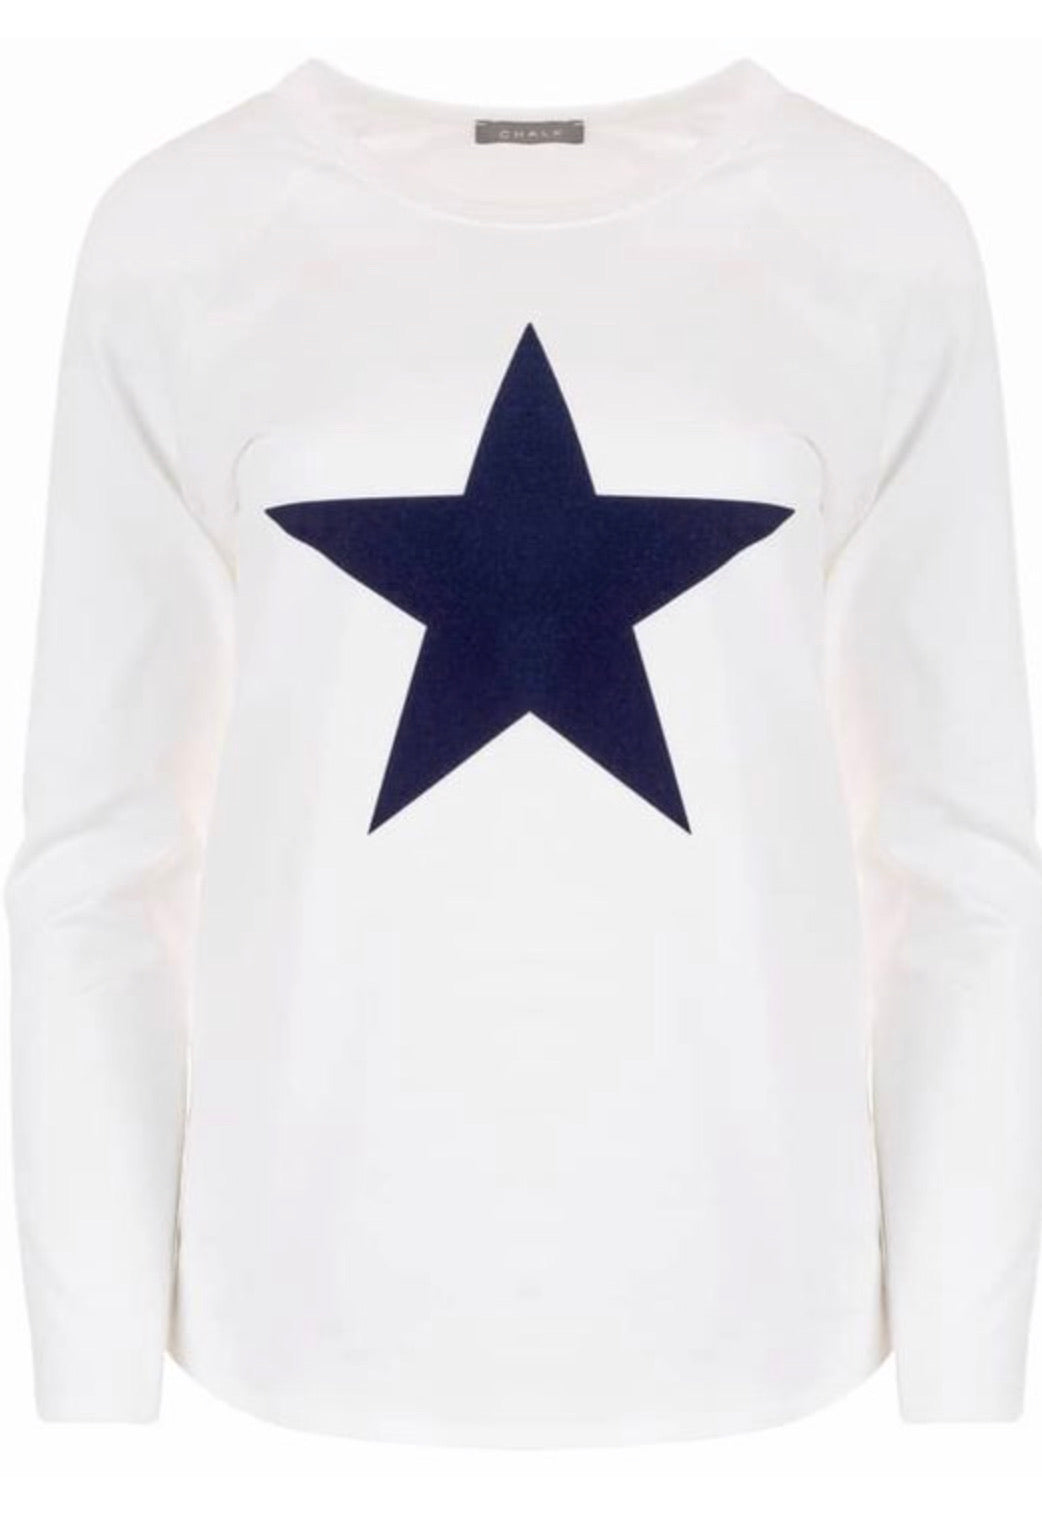 Chalk Top White with Navy Star -Robyn